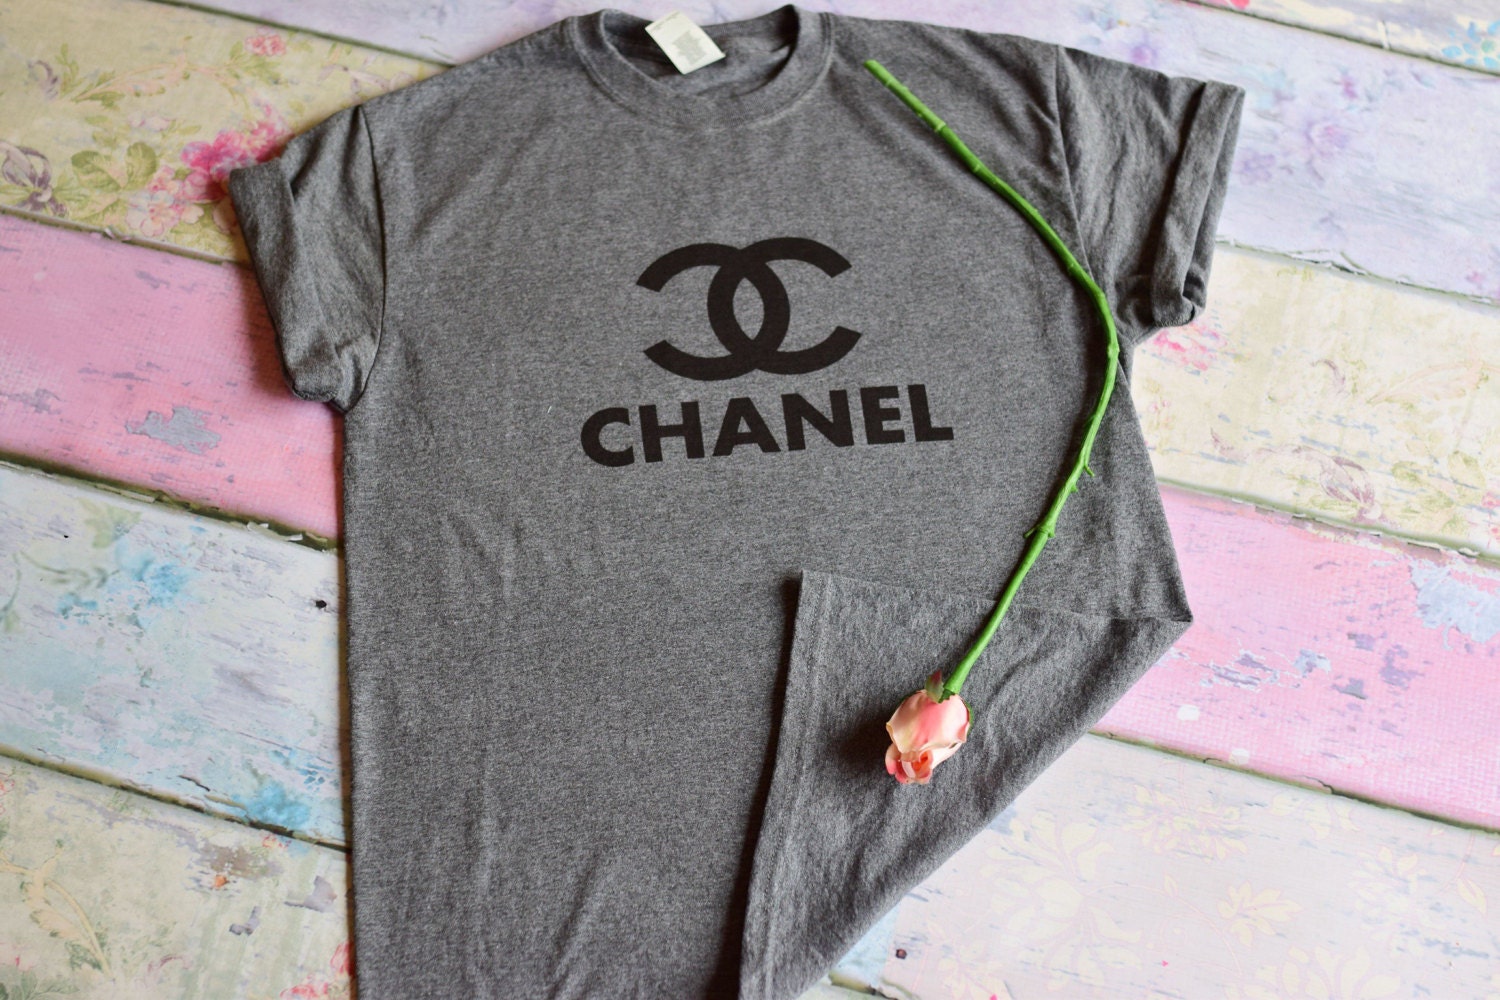 Chanel T shirt; Chanel Valentines; Valentine's Day T shirt; valentines gift for women; Valentines gift for wife; Mother's Day gift; FAVORITE